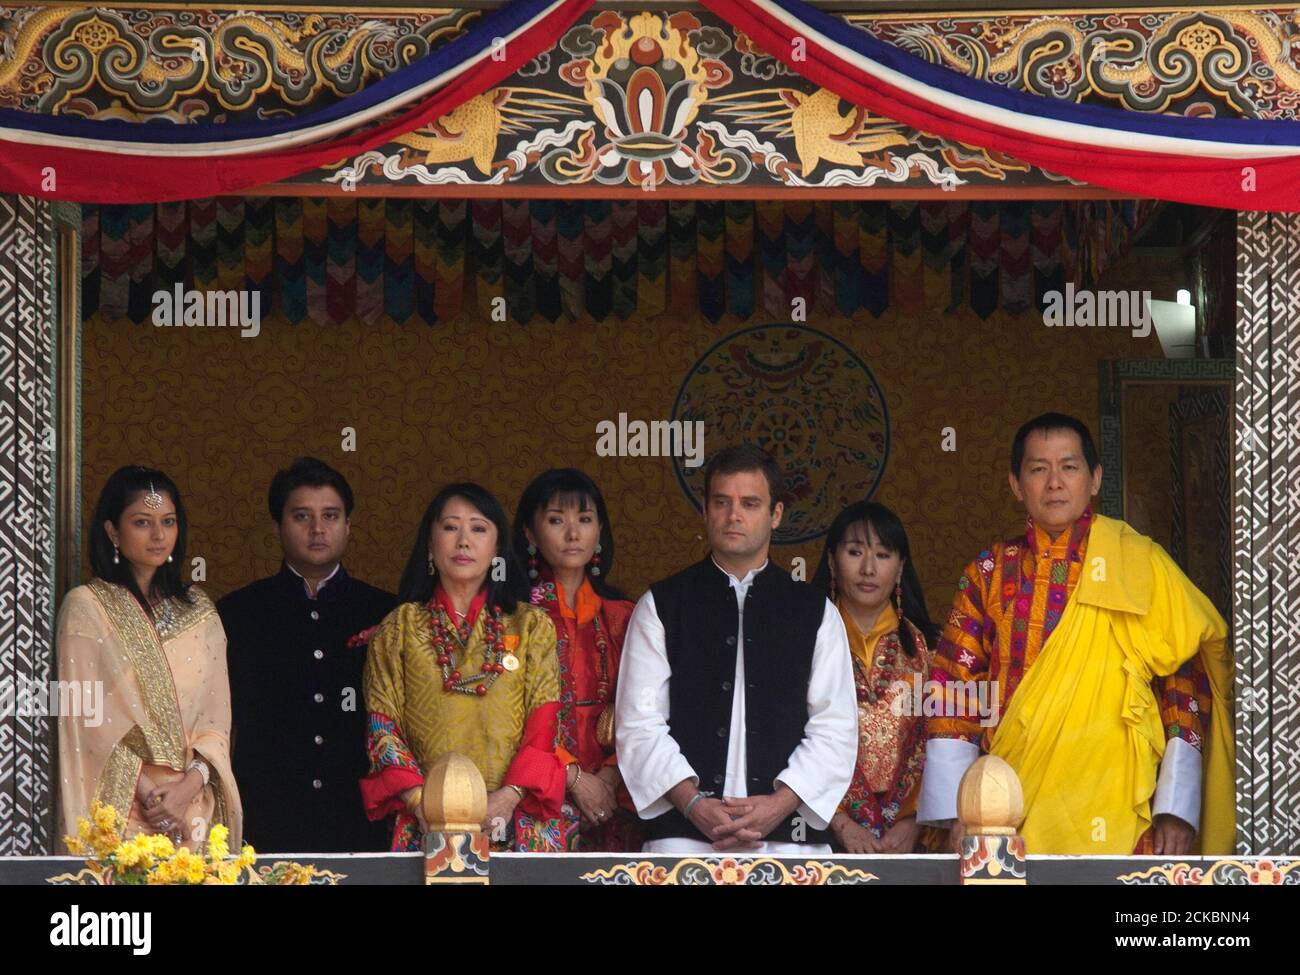 The fourth and former King Jigme Singye Wangchuck (R) watches his son King Jigme Khesar Namgyel Wangchuck and his Queen Jetsun Pema (not in picture) take part in their wedding celebrations at Changlimithang stadium in Thimphu  October 15, 2011. Standing with King Wangchuck are his wives, India's Rahul Gandhi (C), Jyotiraditya Scindia, India's Minister of State for Ministry of Commerce and Industry and his wife Priyadarshini Scindia (L).   REUTERS/Adrees Latif   (BHUTAN - Tags: ROYALS ENTERTAINMENT TPX IMAGES OF THE DAY POLITICS) Banque D'Images